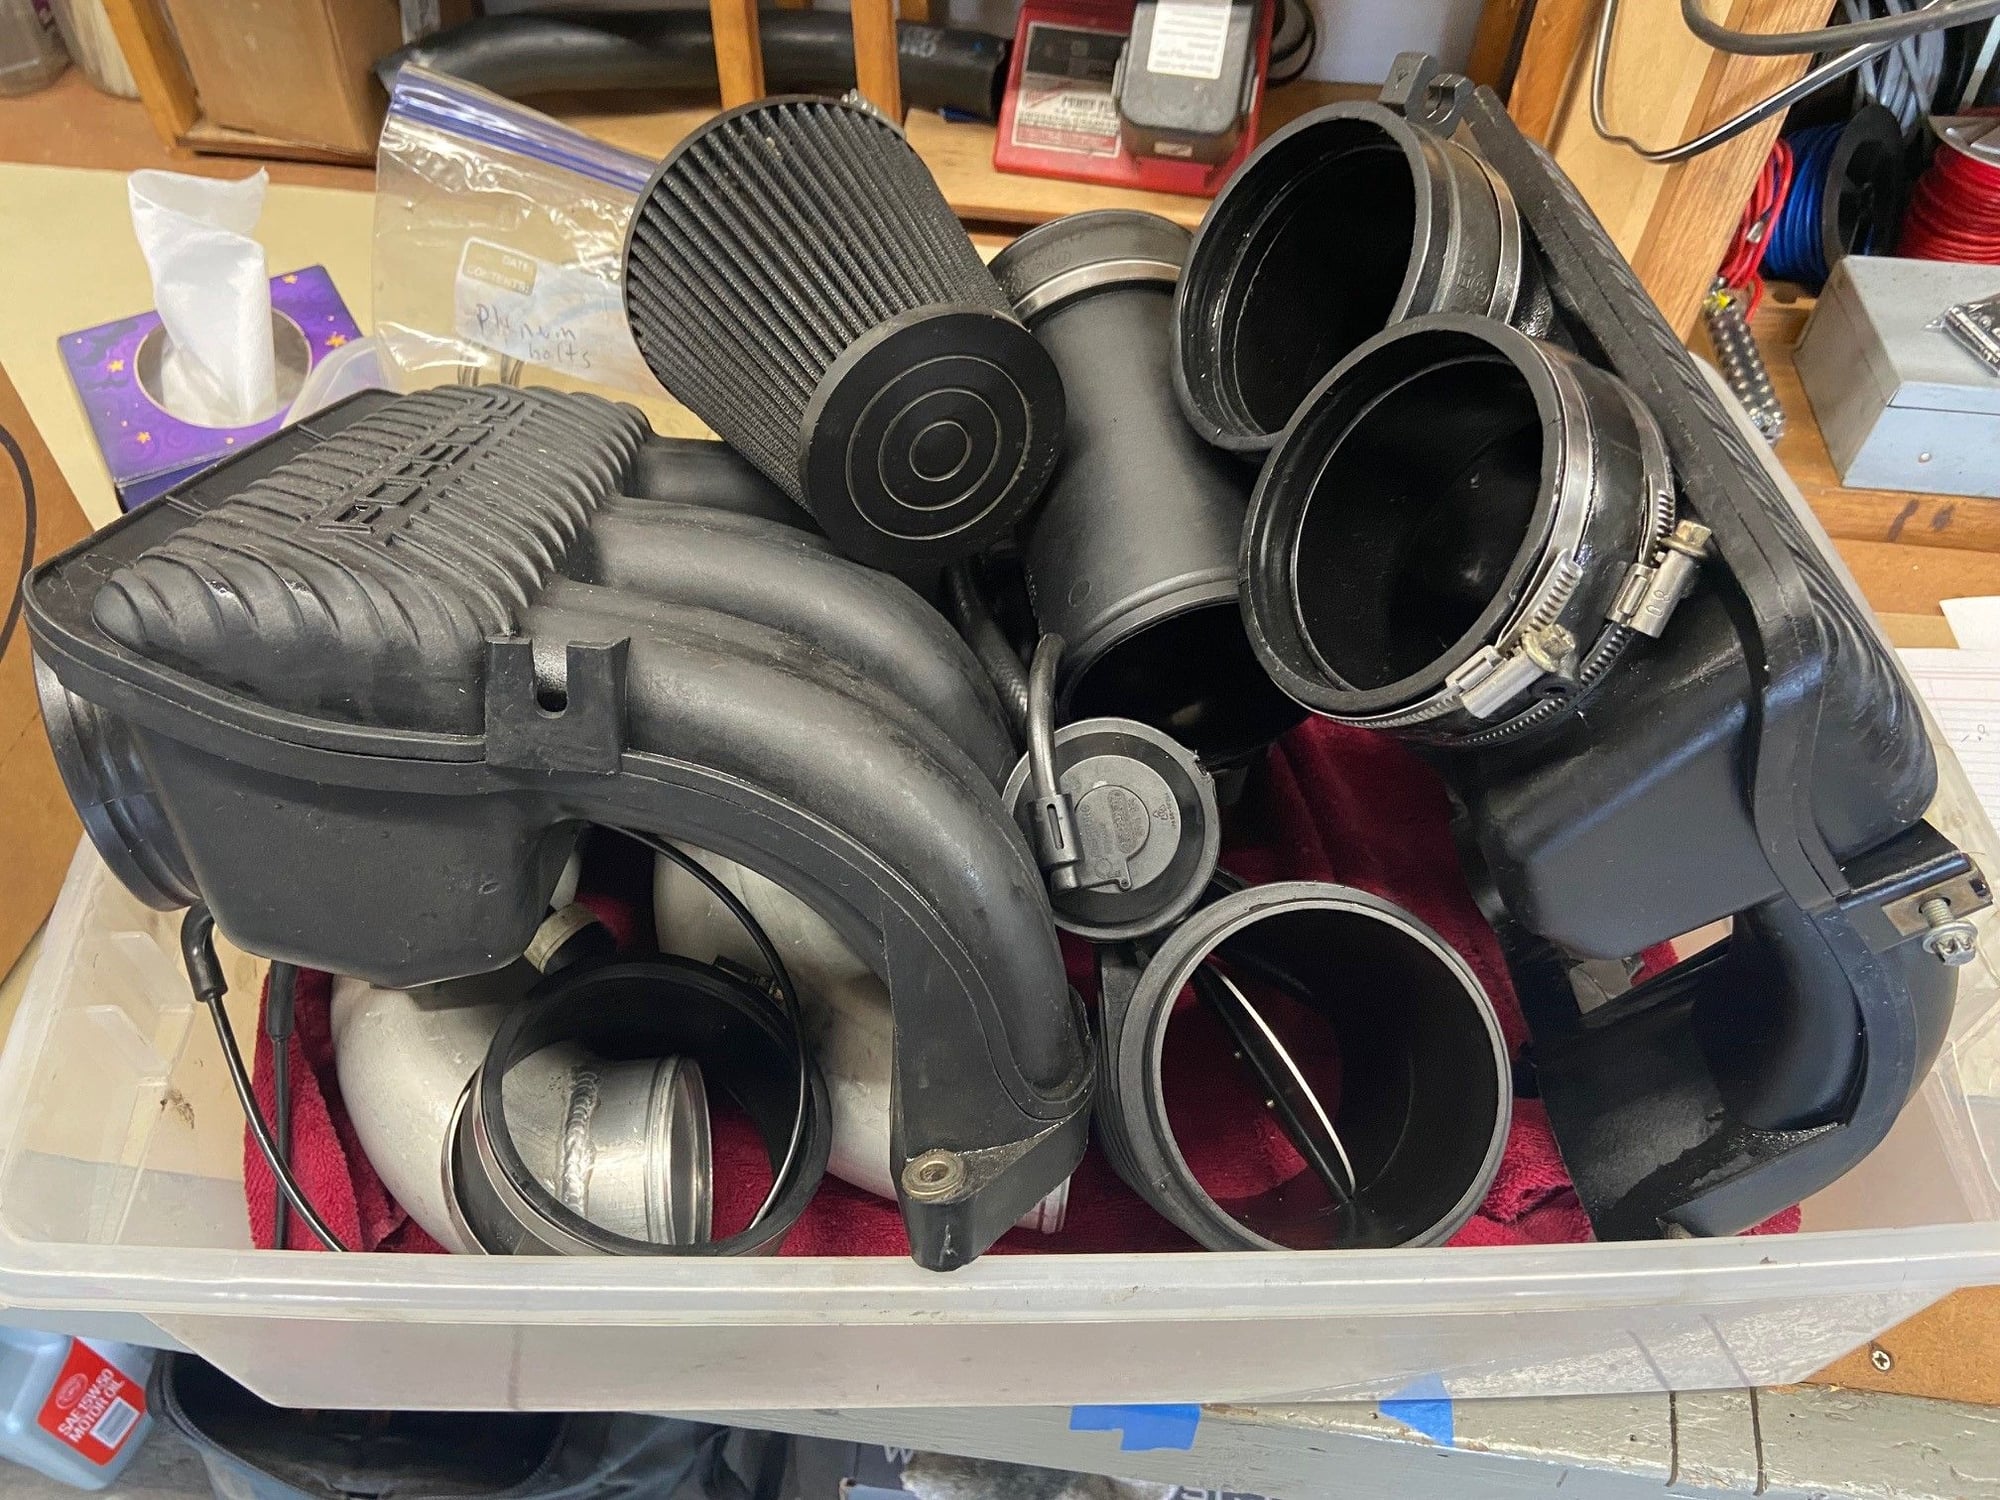 Engine - Intake/Fuel - 996 Intake Plenum, MAF and Cold Air Intake Pipes - Used - 1997 to 2001 Porsche 911 - Pittsford, NY 14534, United States